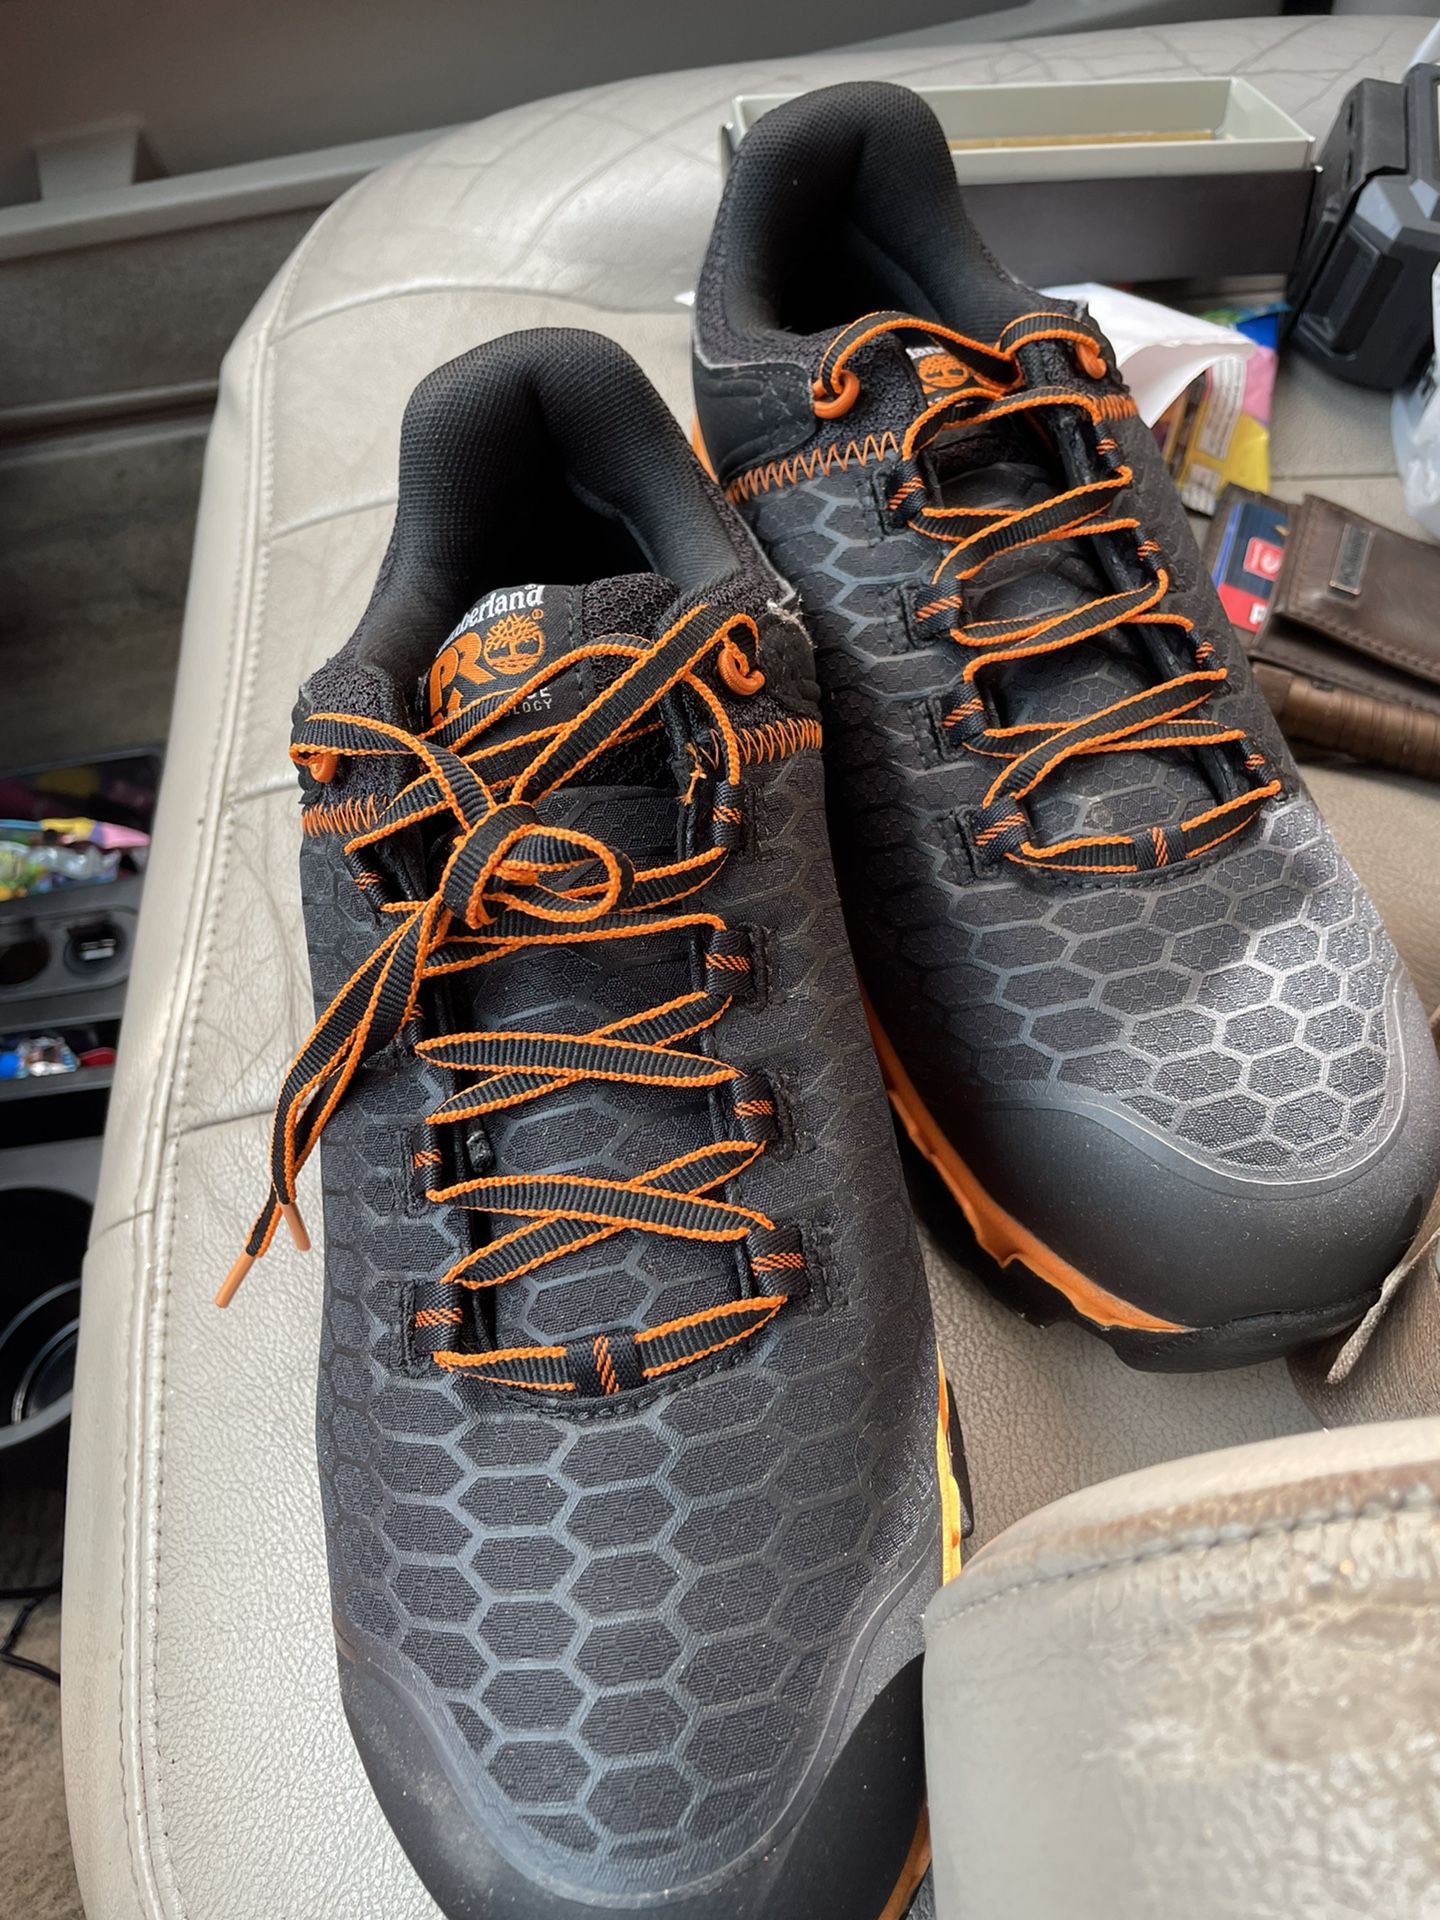 Timberland Pro Composite Toe Shoes 